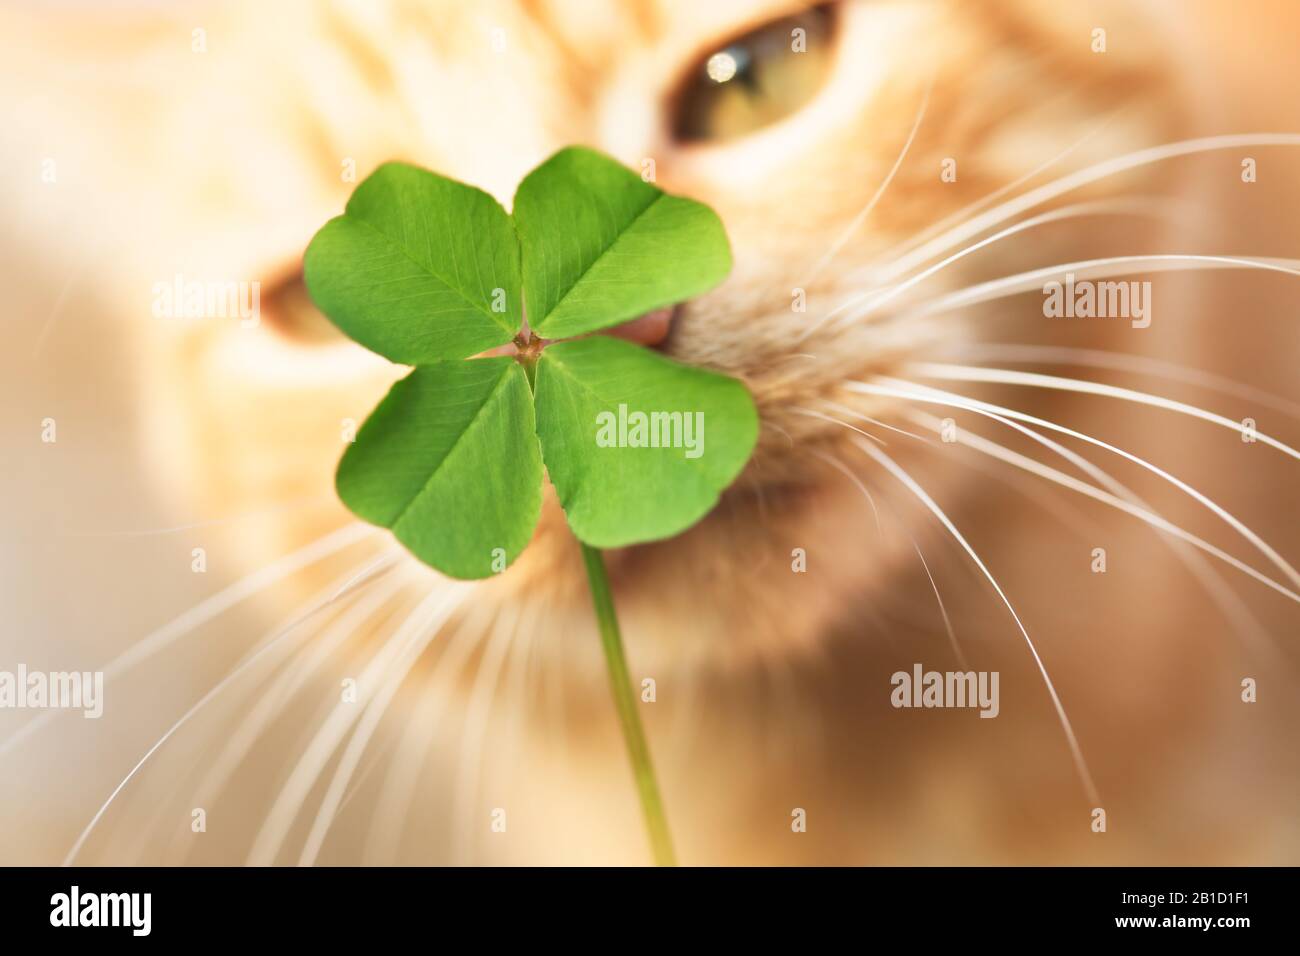 Beautiful orange tabby cat sniffing a lucky four leaf clover. Finding a lucky or special cat concept. Stock Photo